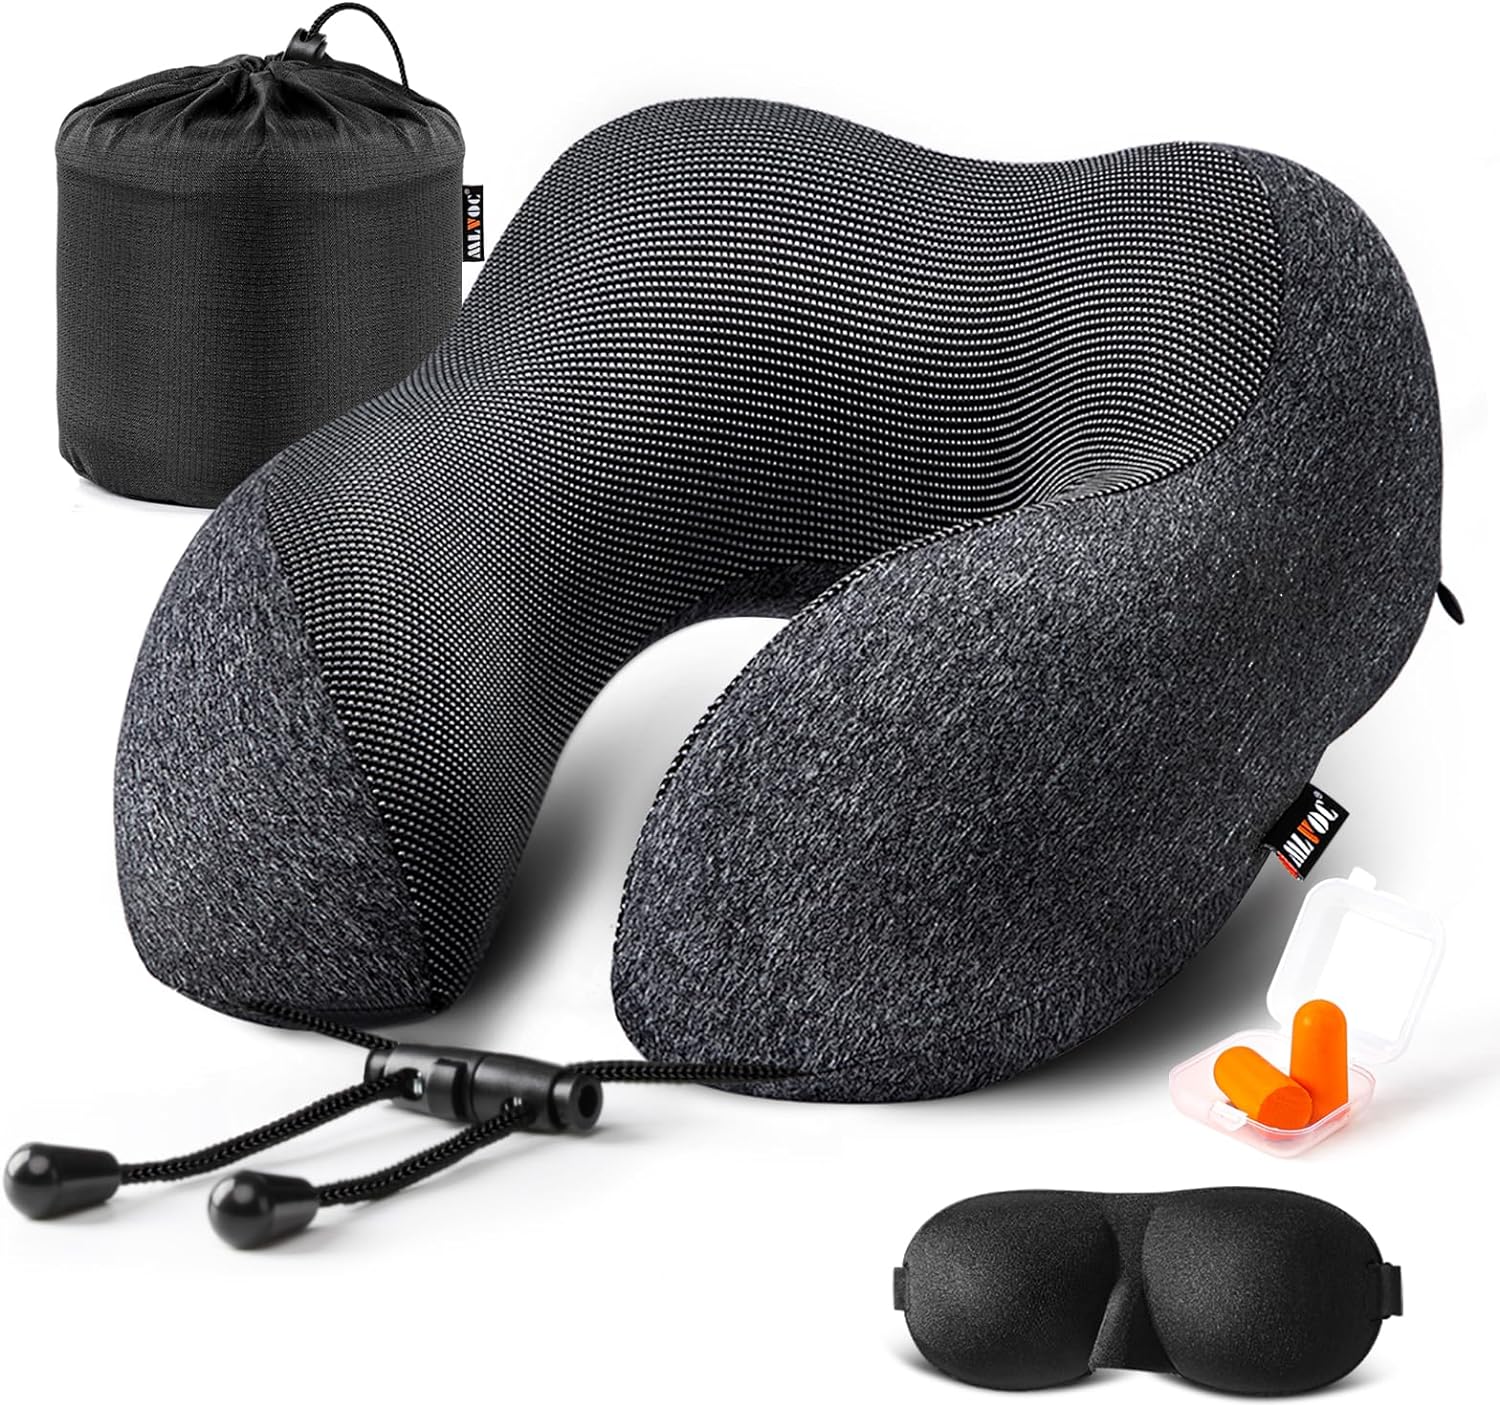 Adjustable Travel Pillow for Neck Chin Lumbar and Leg Support Comfortable  Bendable Roll Pillow Machine Washable 